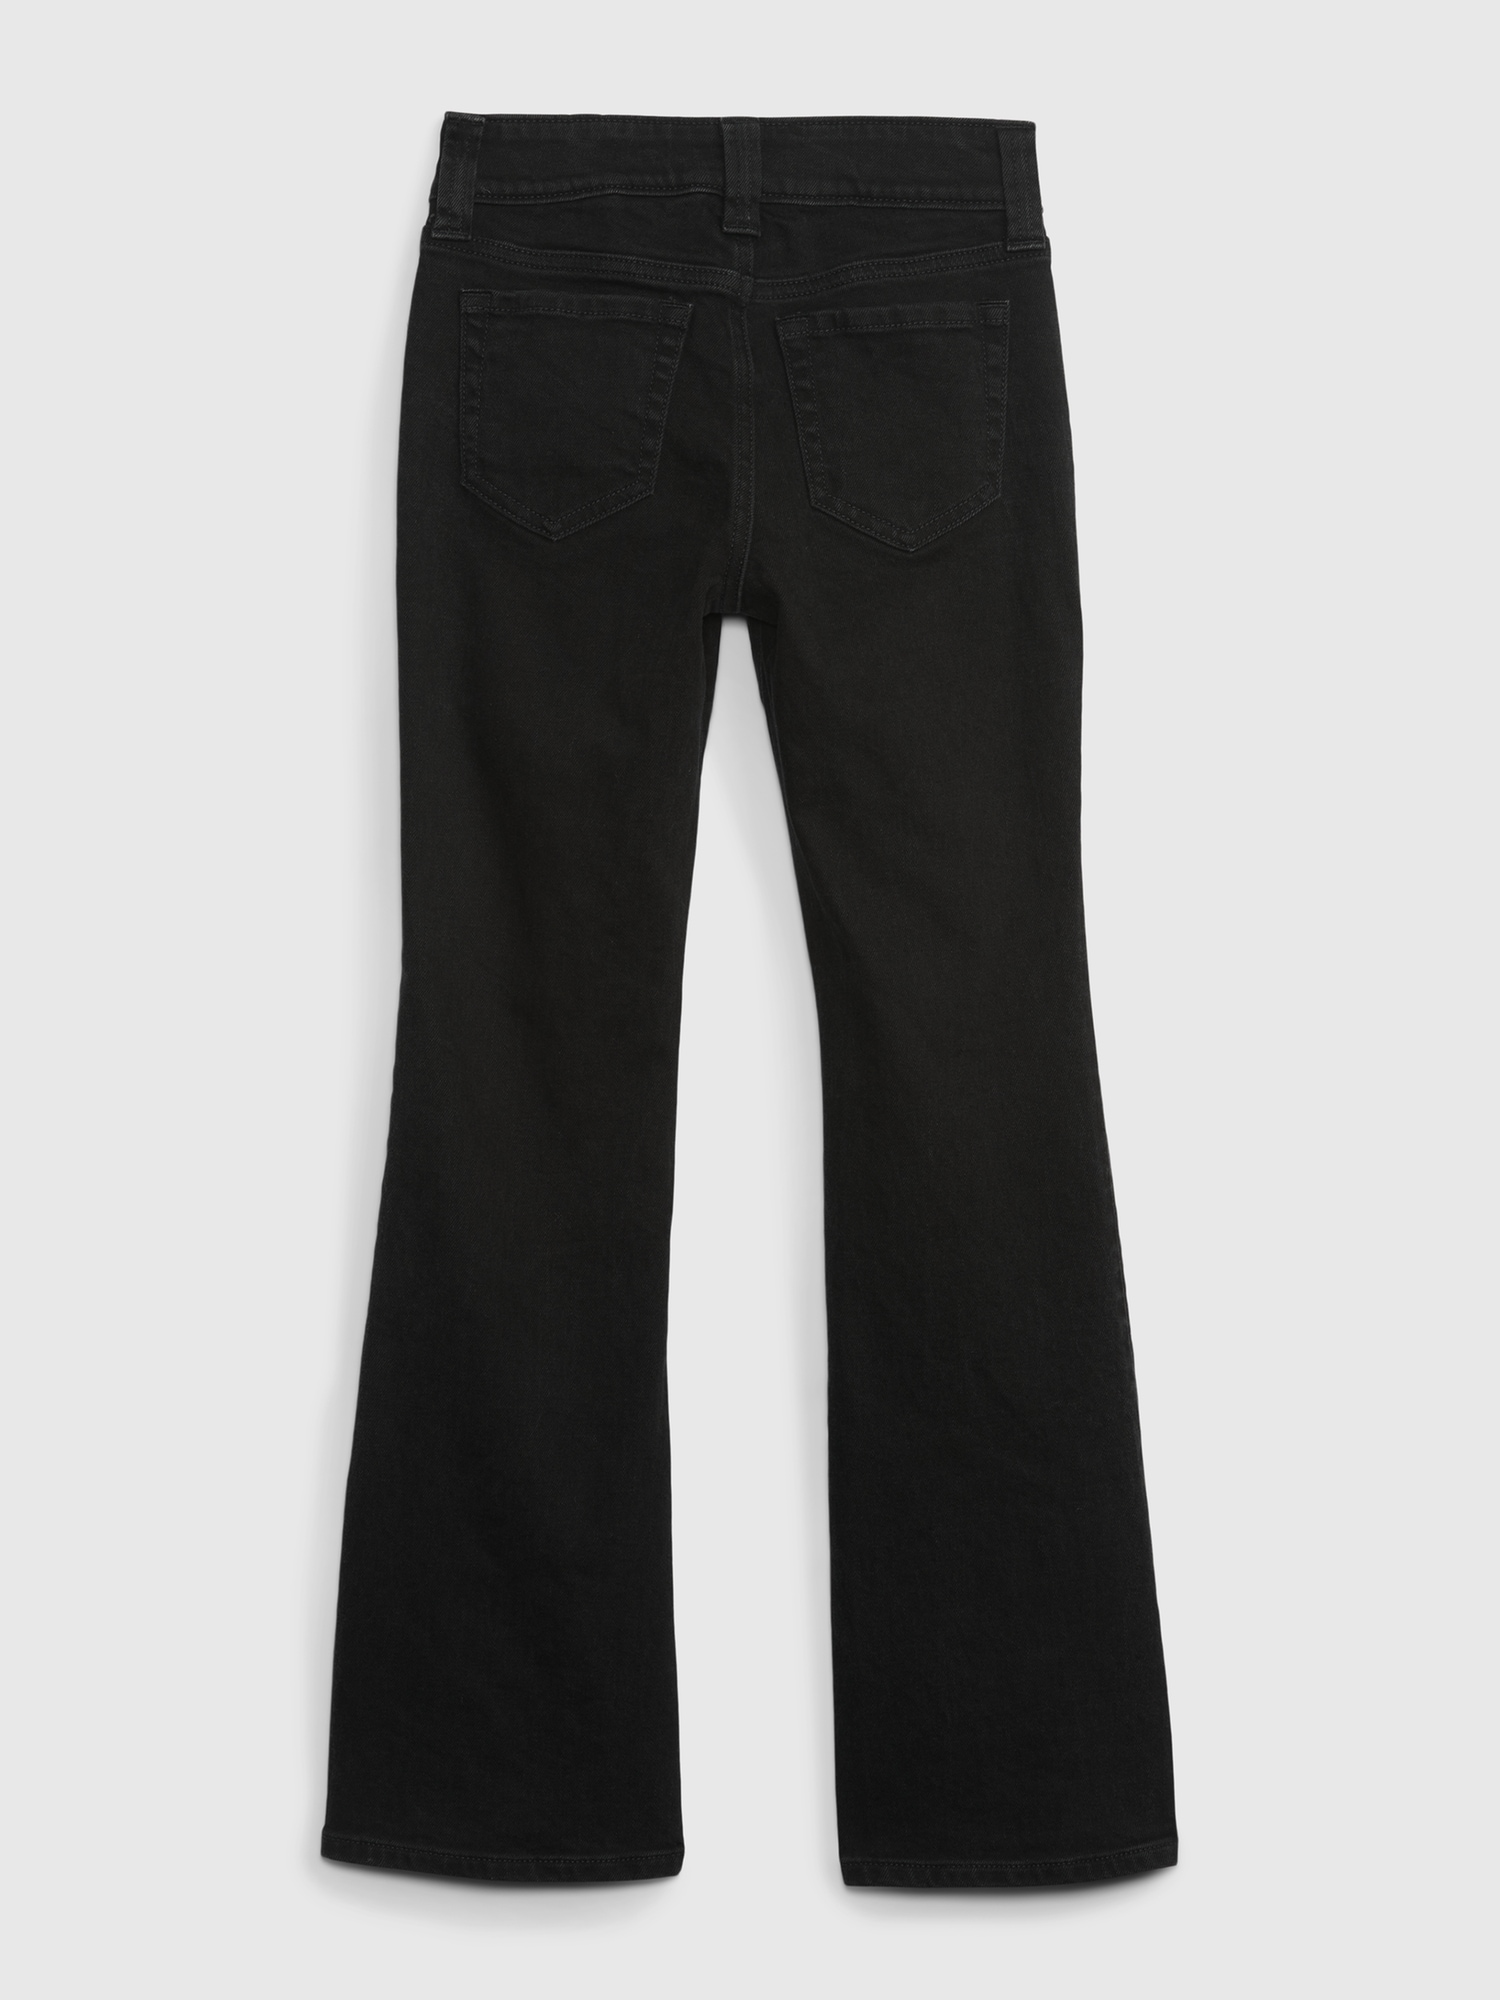 Buy Gap High Waisted Vintage Flared Jeans from the Gap online shop